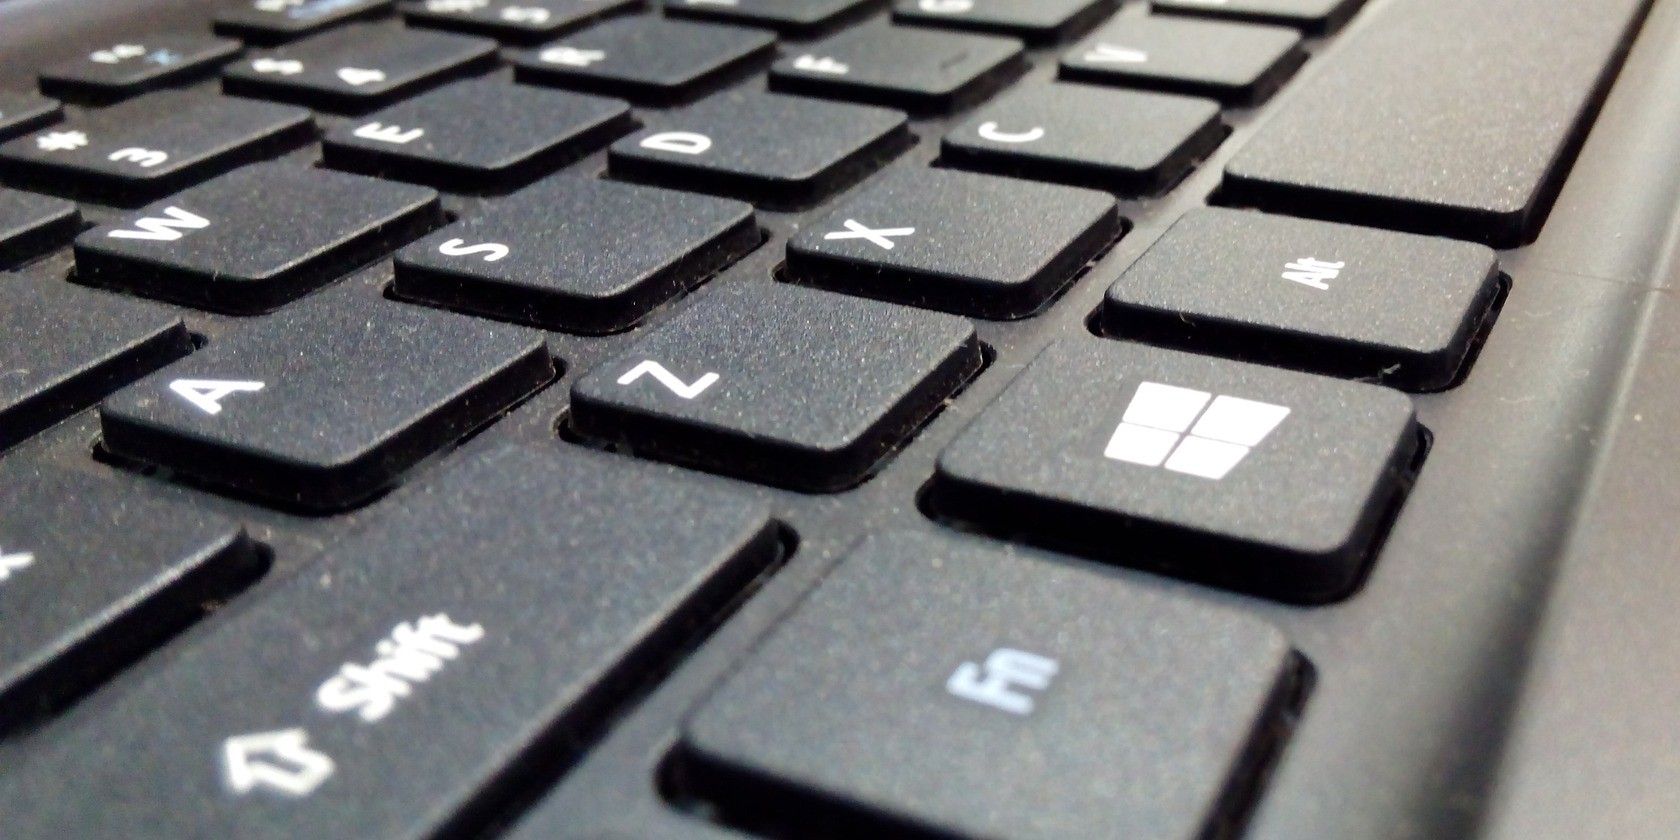 Close Up of Black Keyboard with Shift, Windows, and Alt Keys